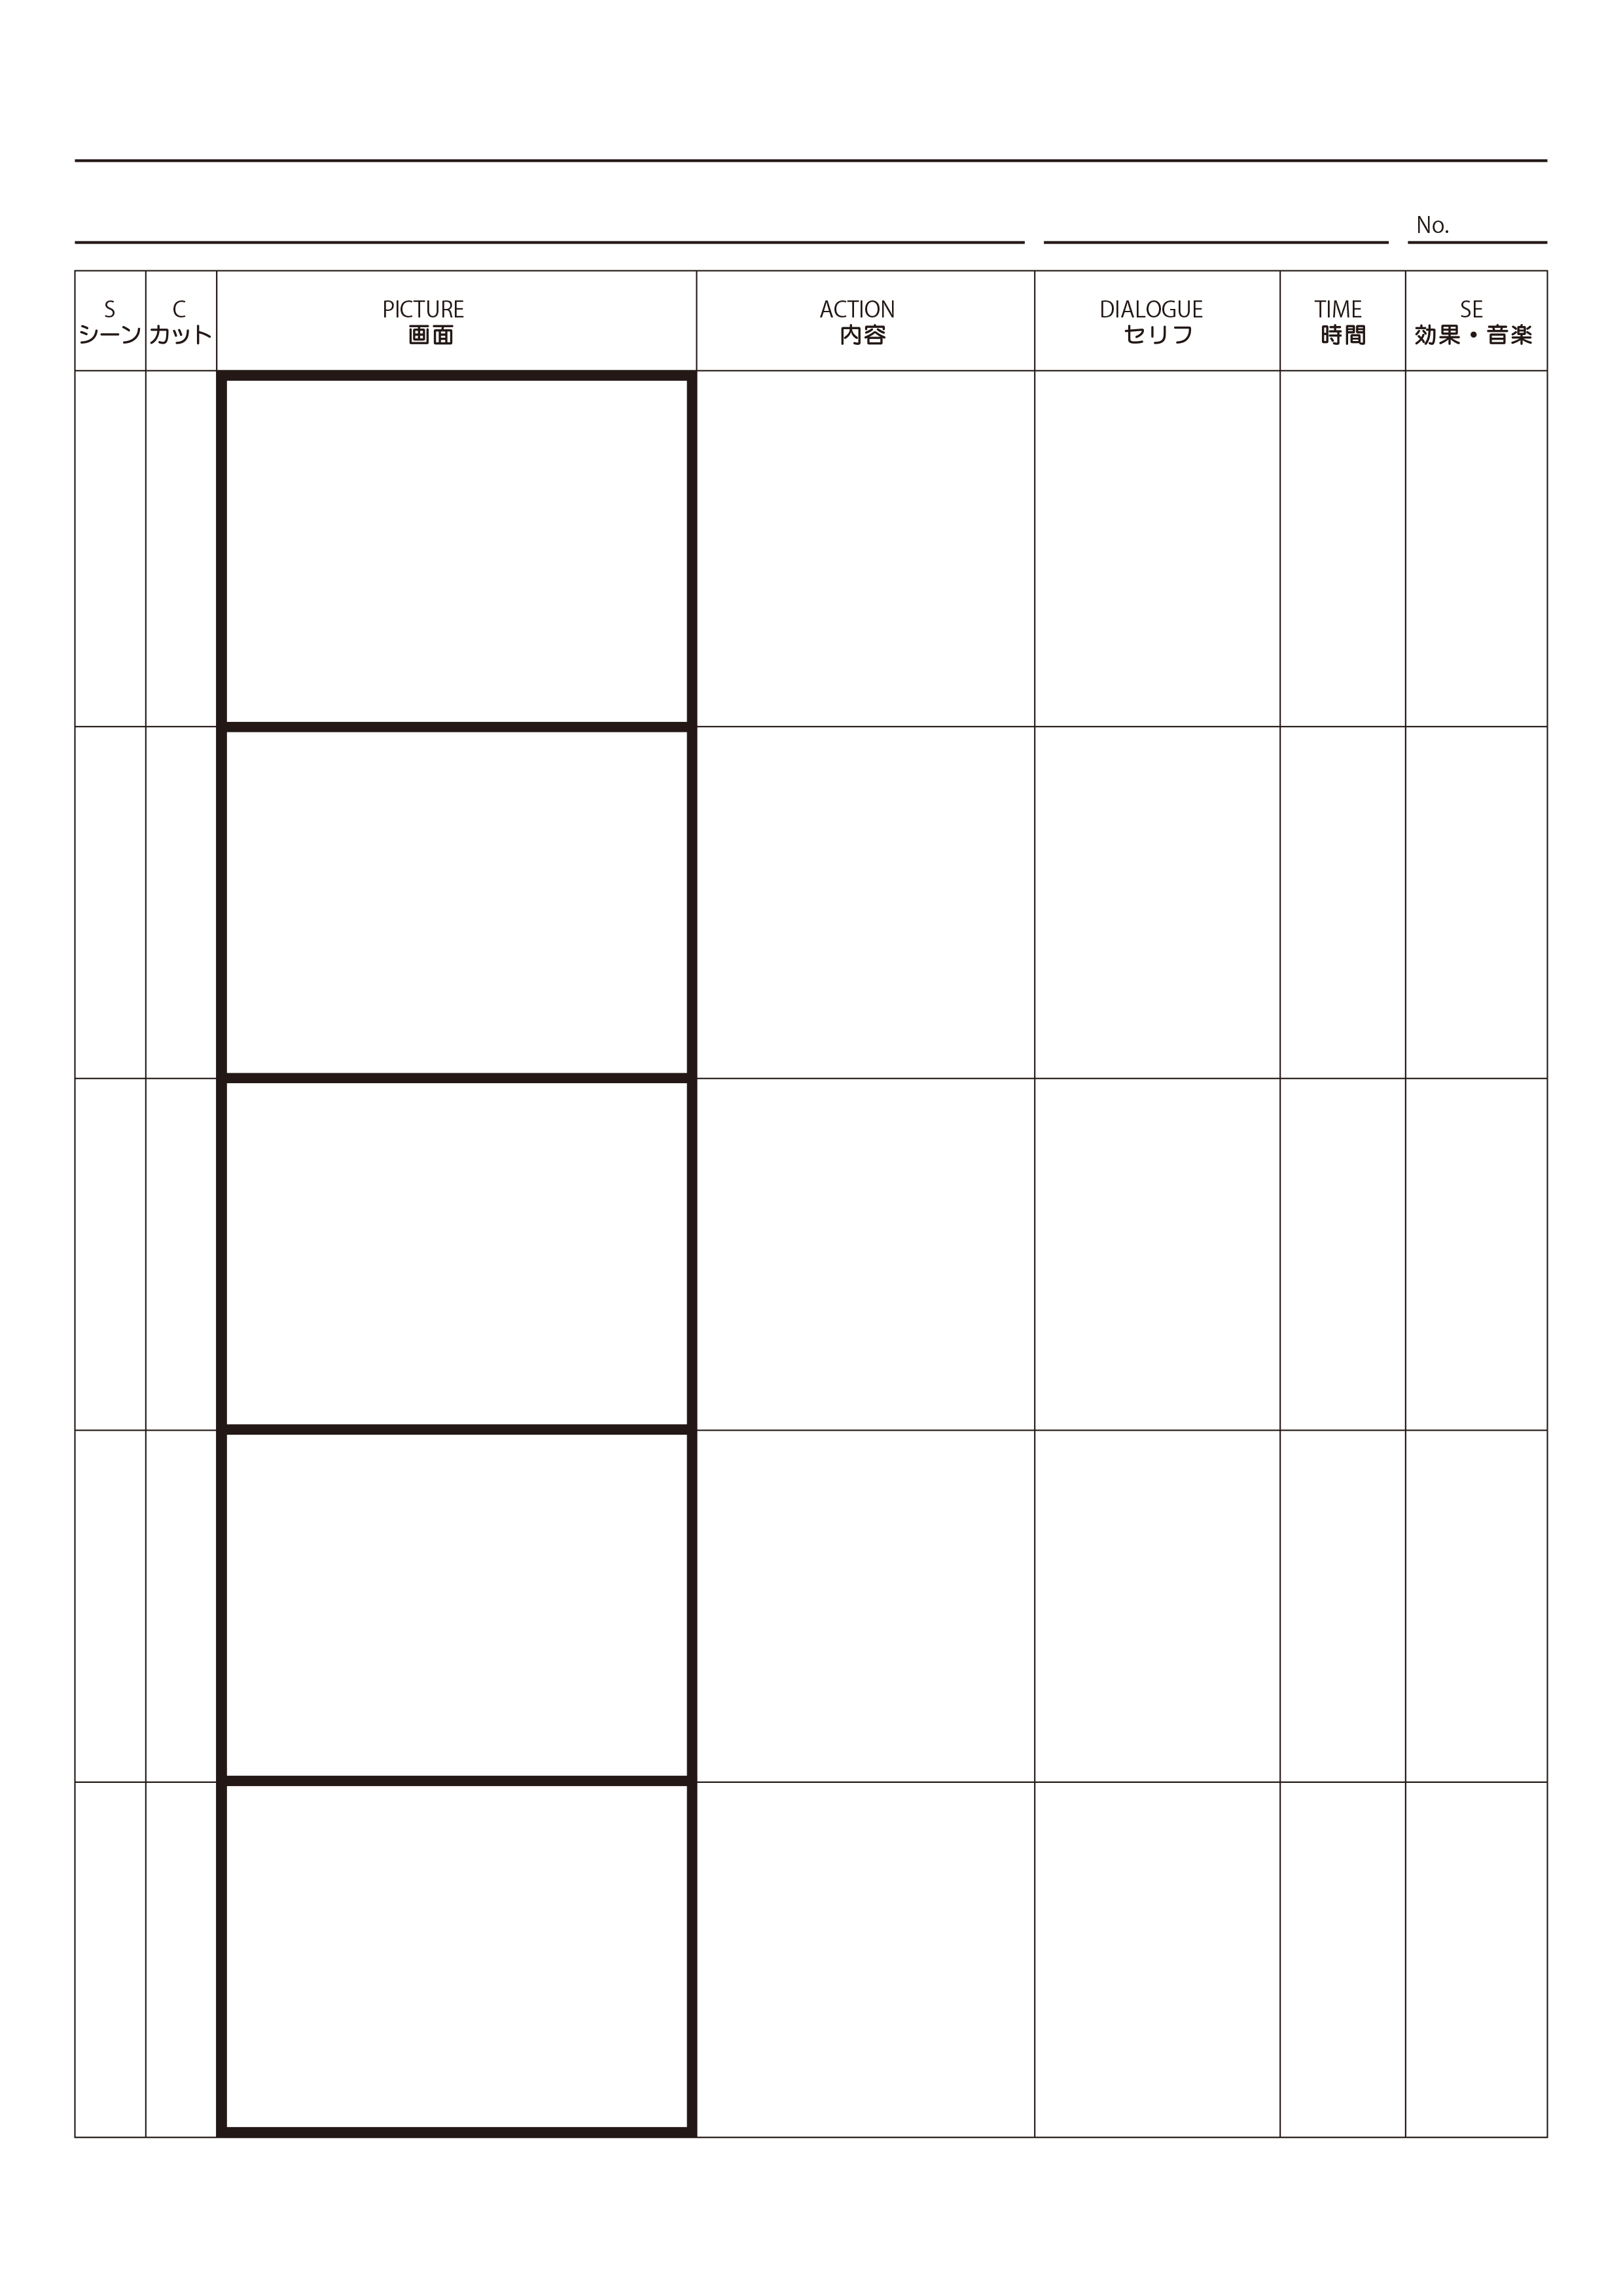 Story Board Sheets 絵コンテ用紙 ダウンロード自由 絵コンテの